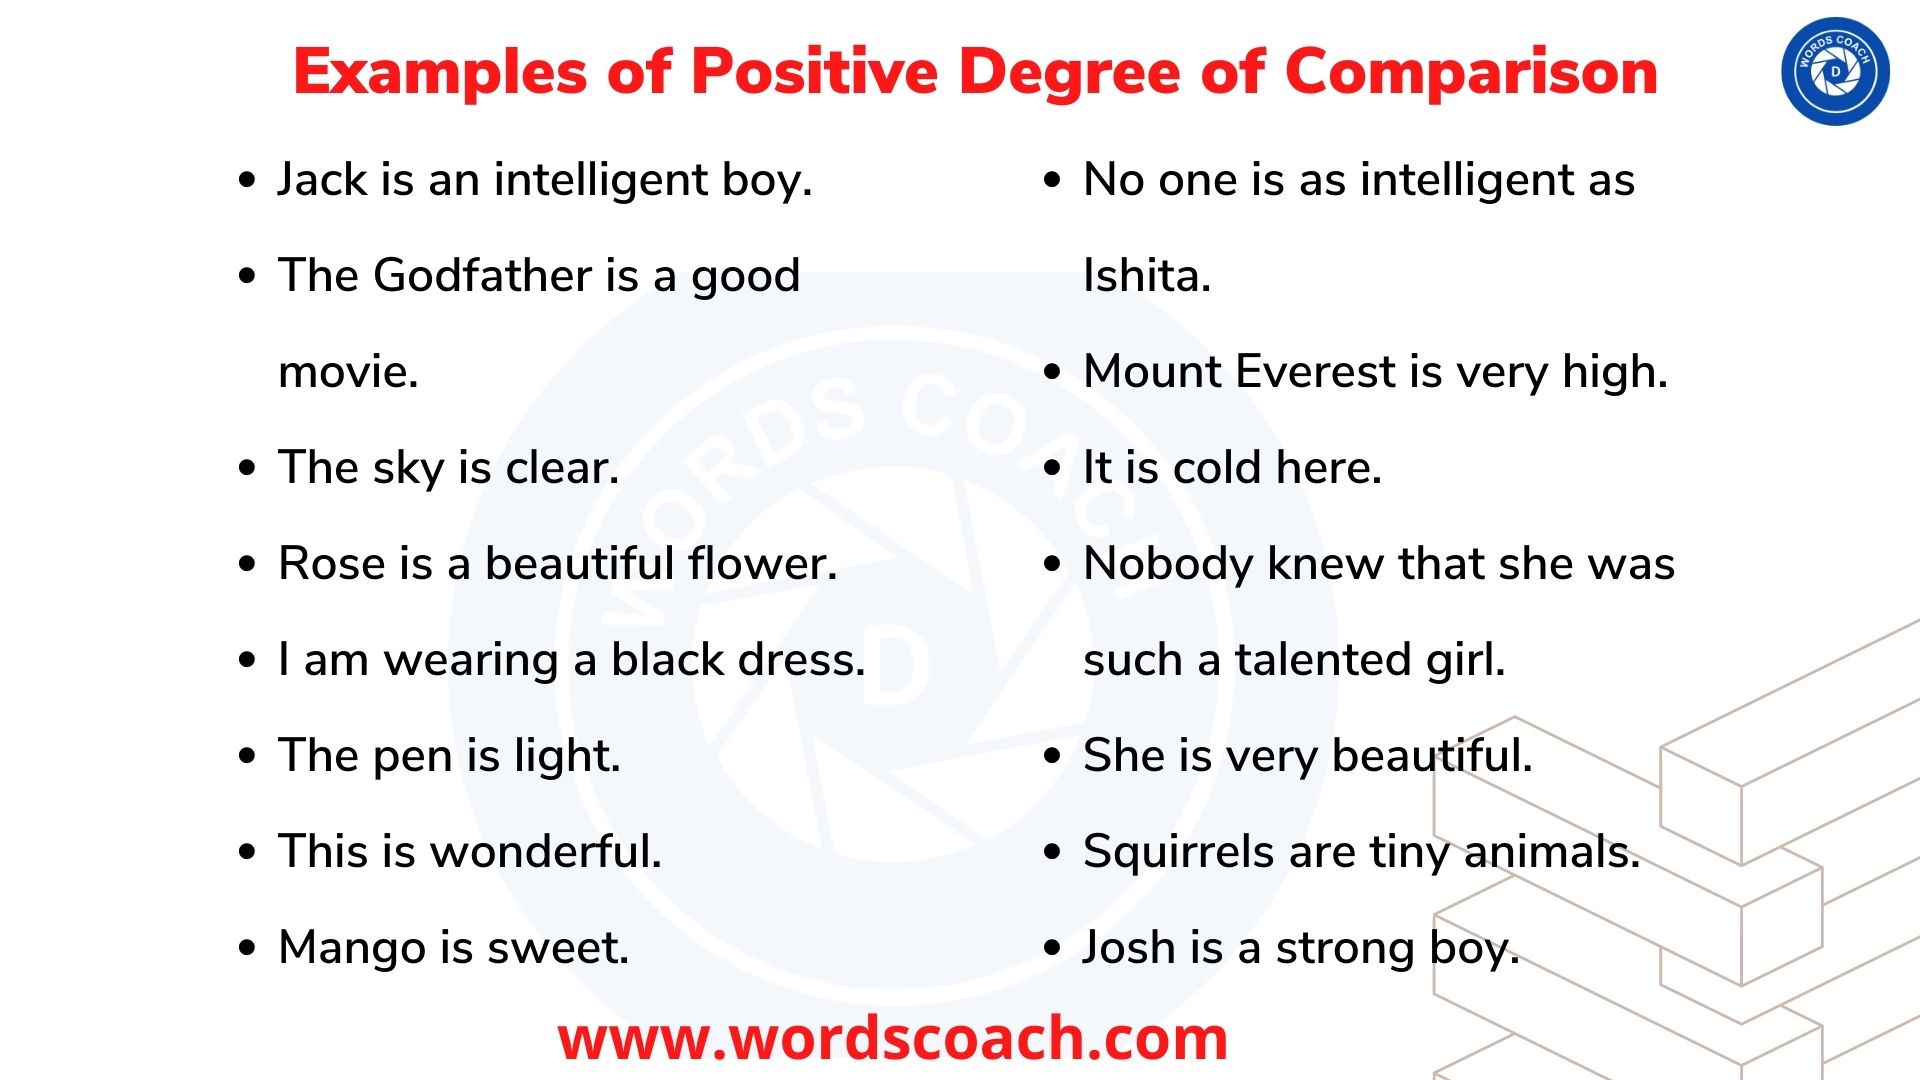 What is the Positive Degree of Comparison?